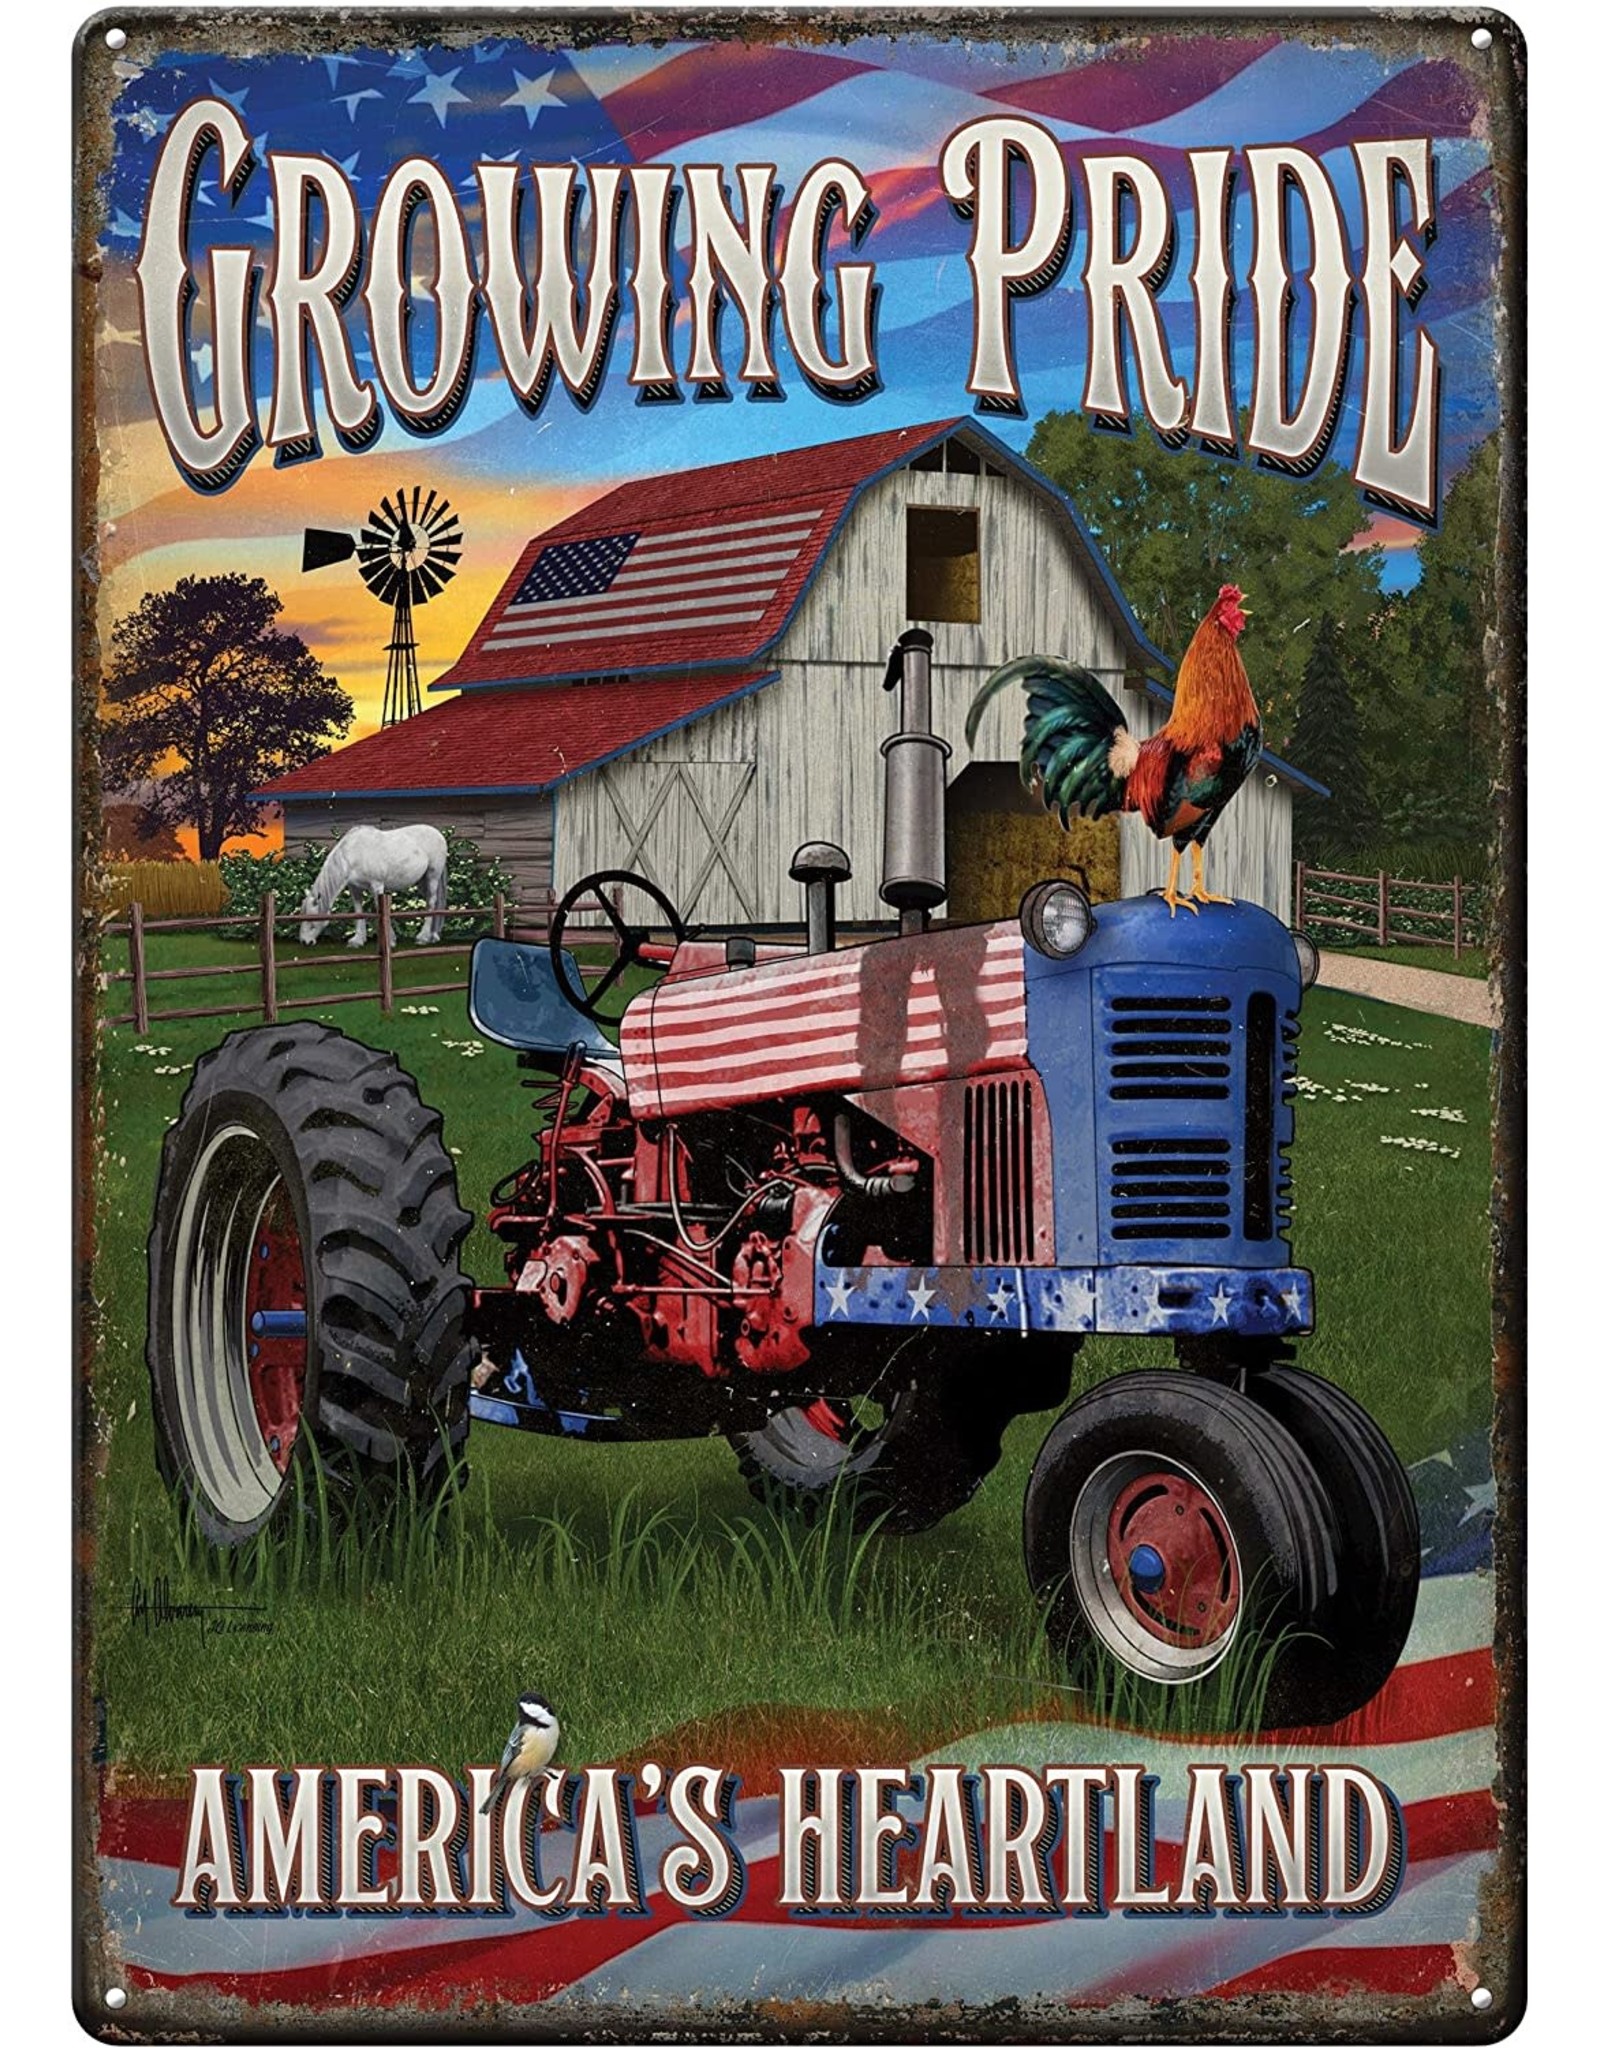 Rivers Edge Products Tin Sign 12"x17" - Growing Pride